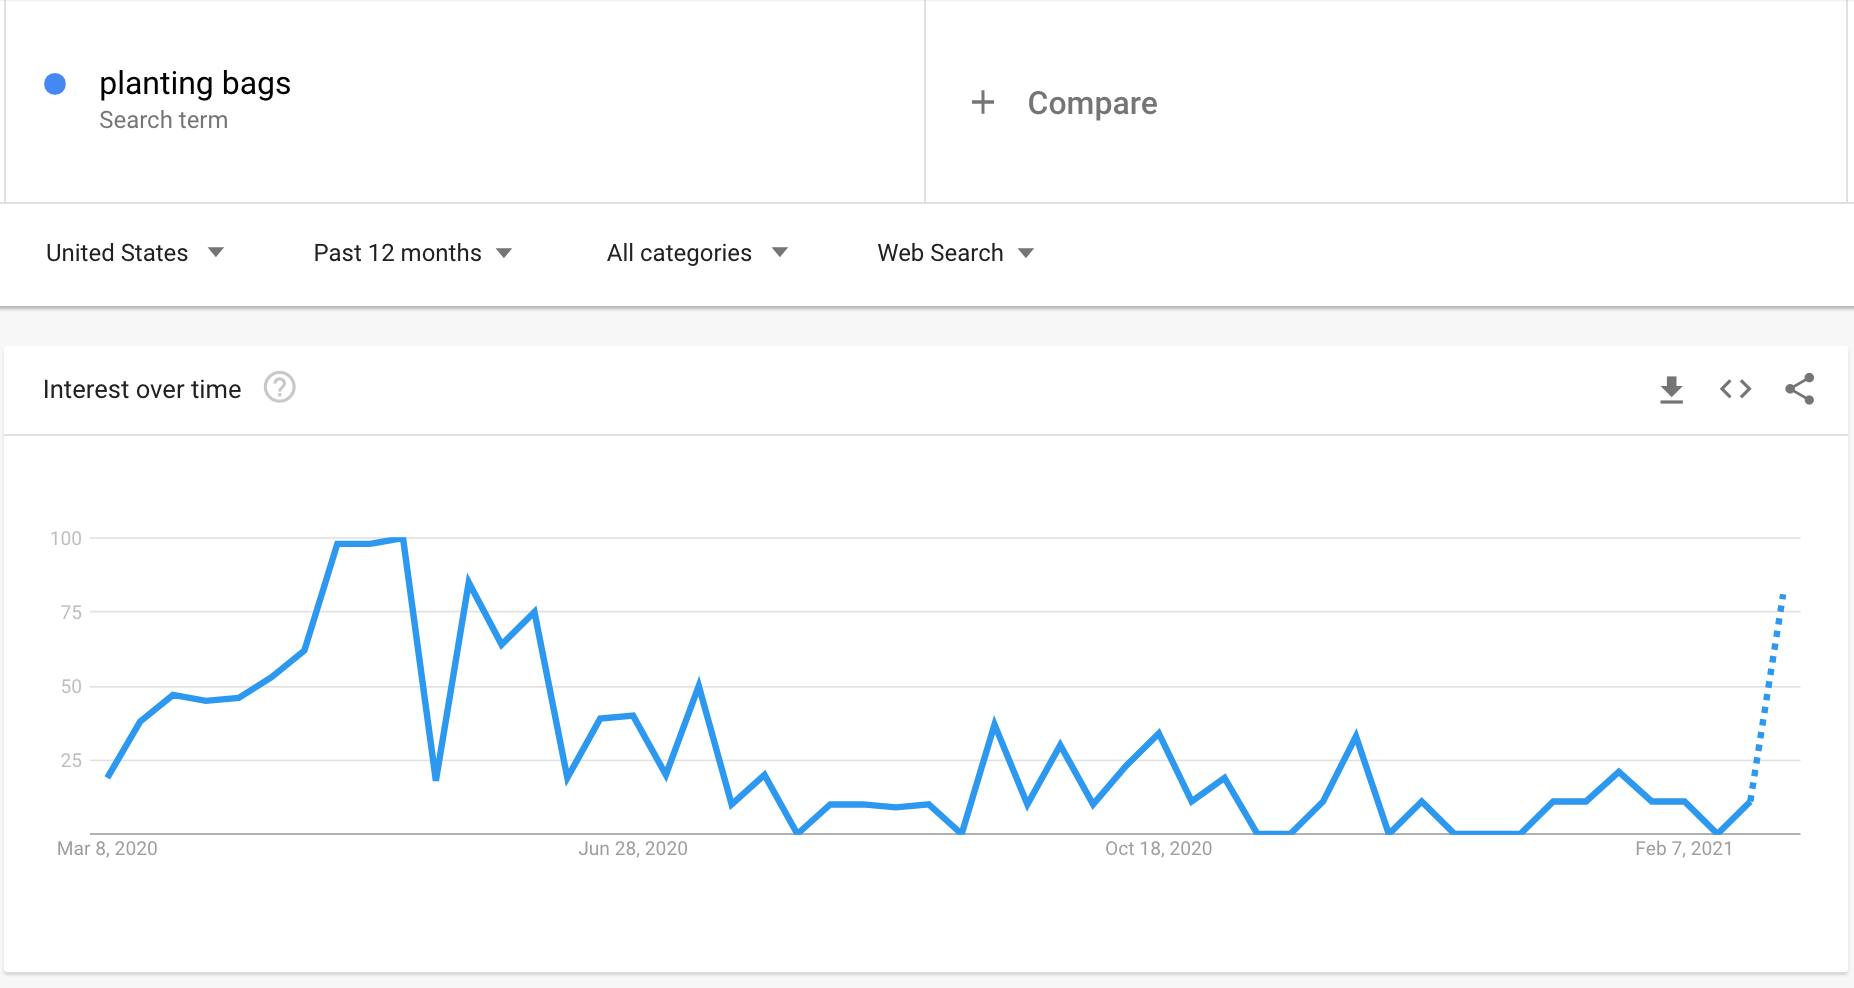 Google Trends graph showing the interest in planting bags